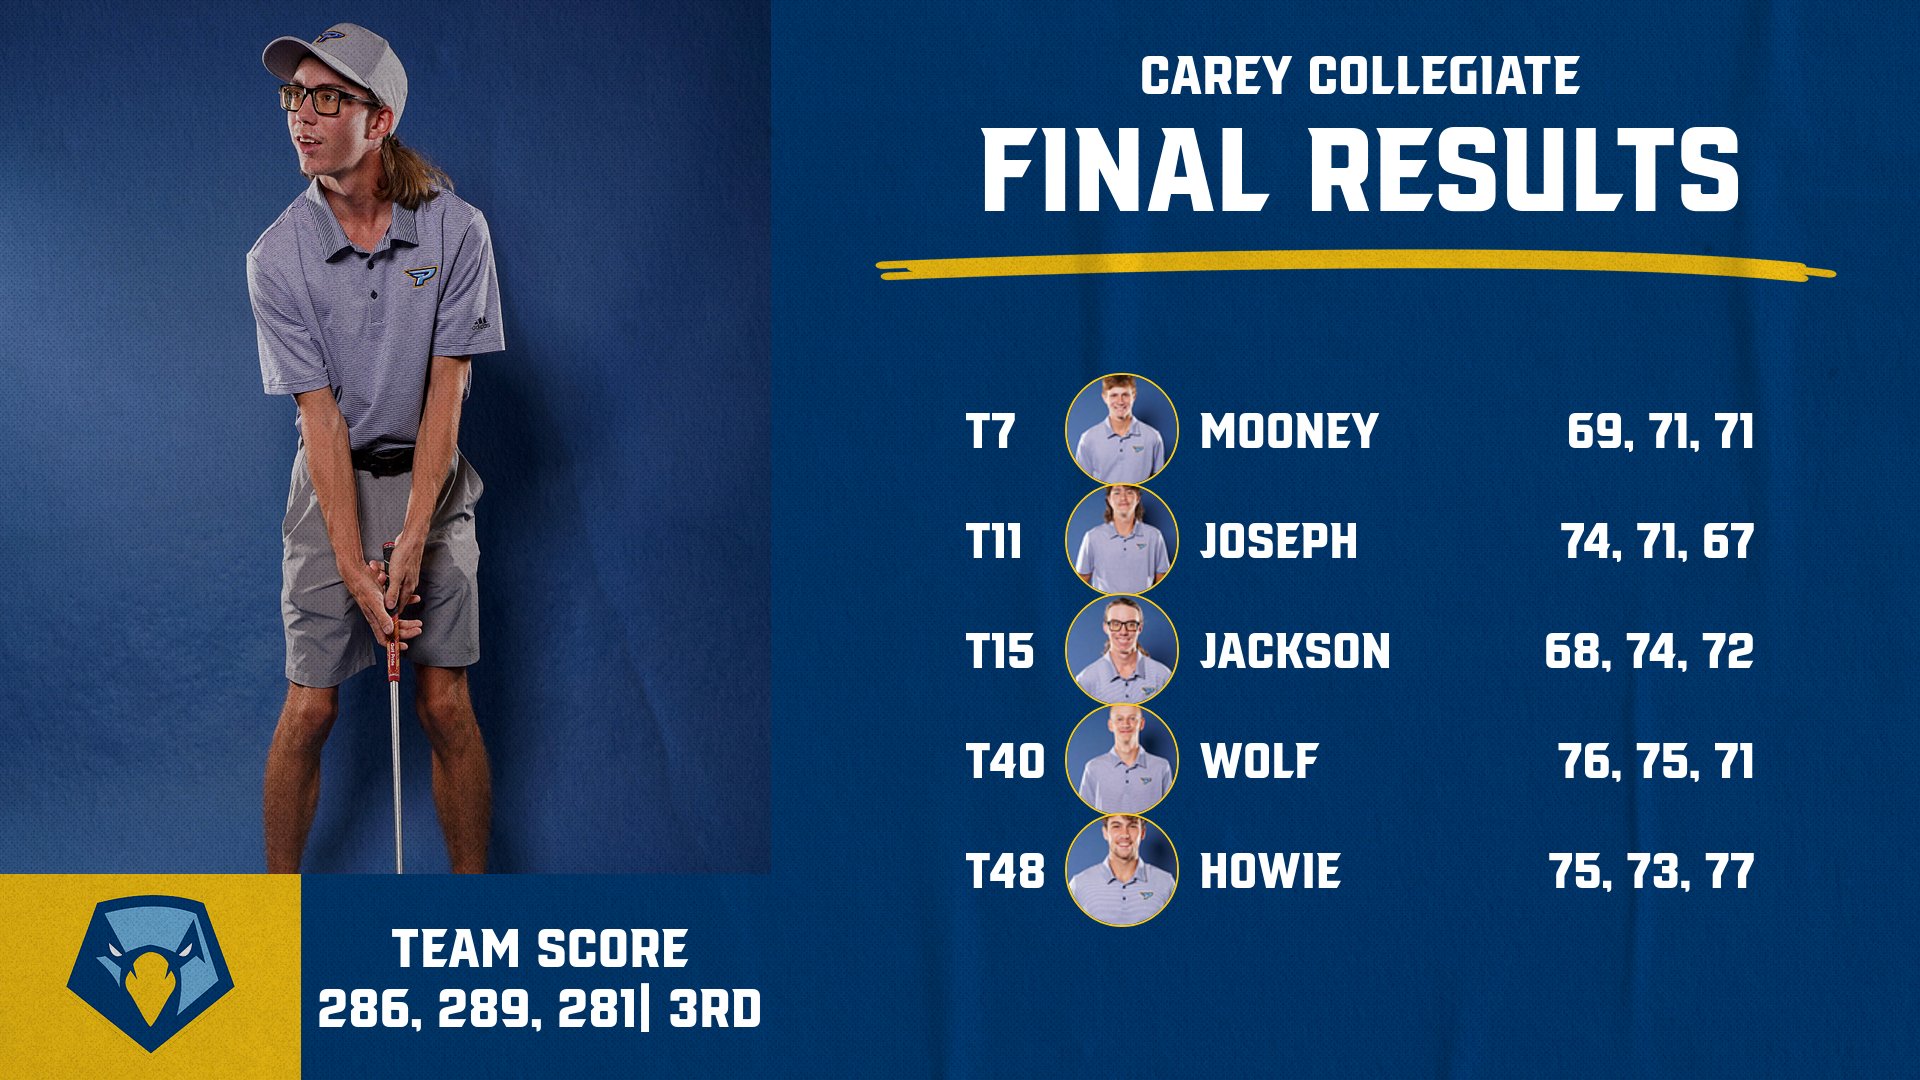 Men&rsquo;s Golf powers through for a Third-Place finish at the Carey Collegiate